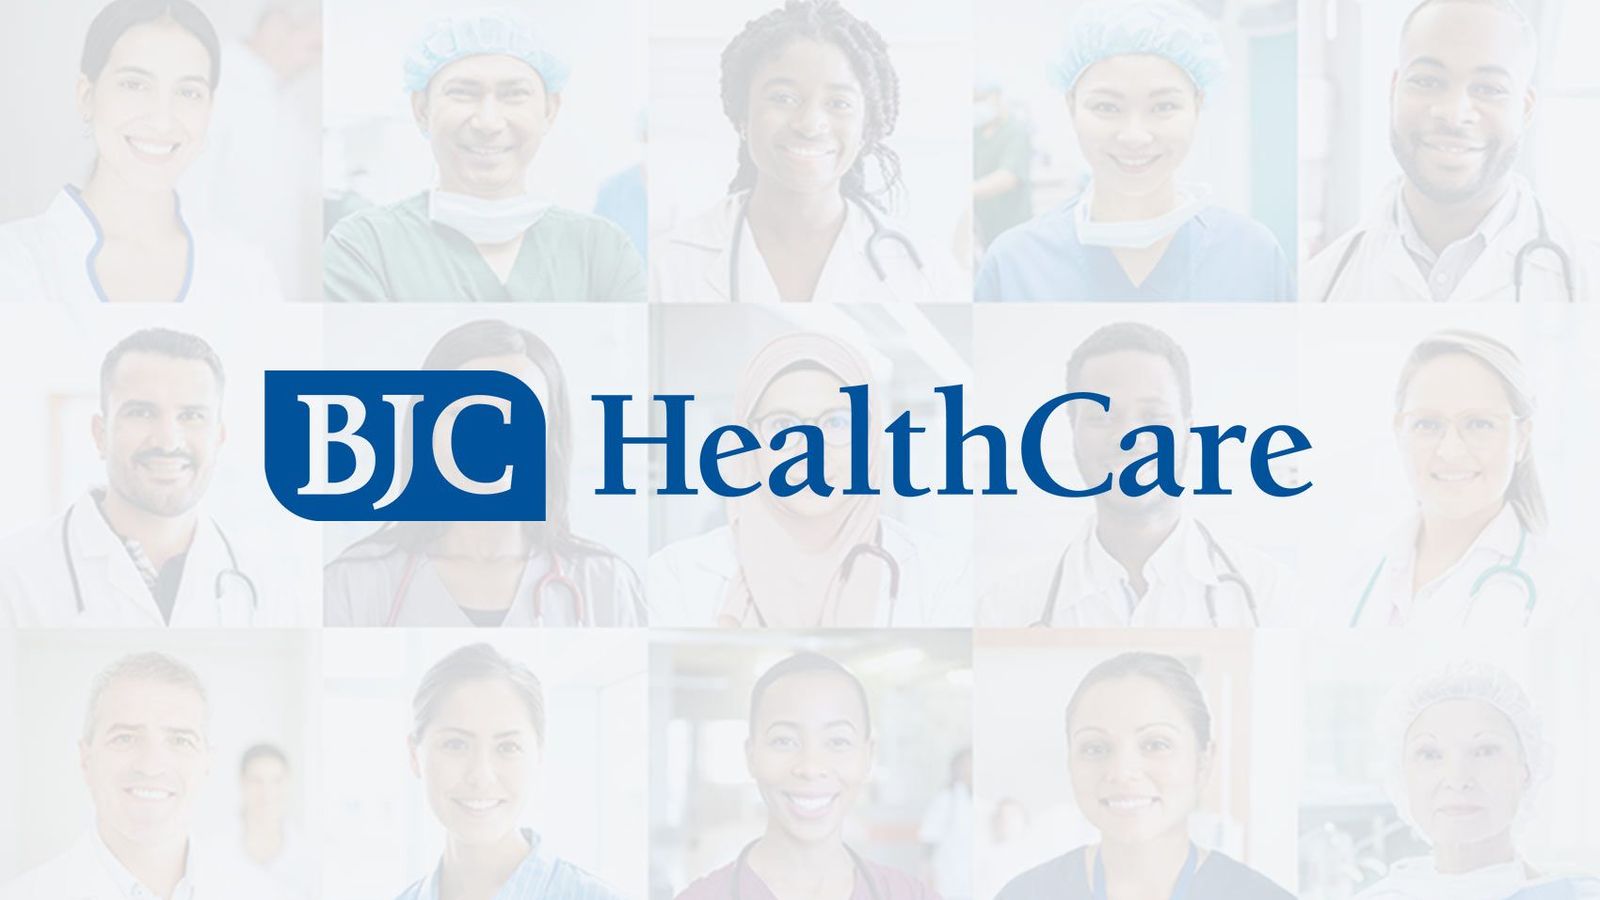 BJC Healthcare creates an onboarding experience that guides people to success